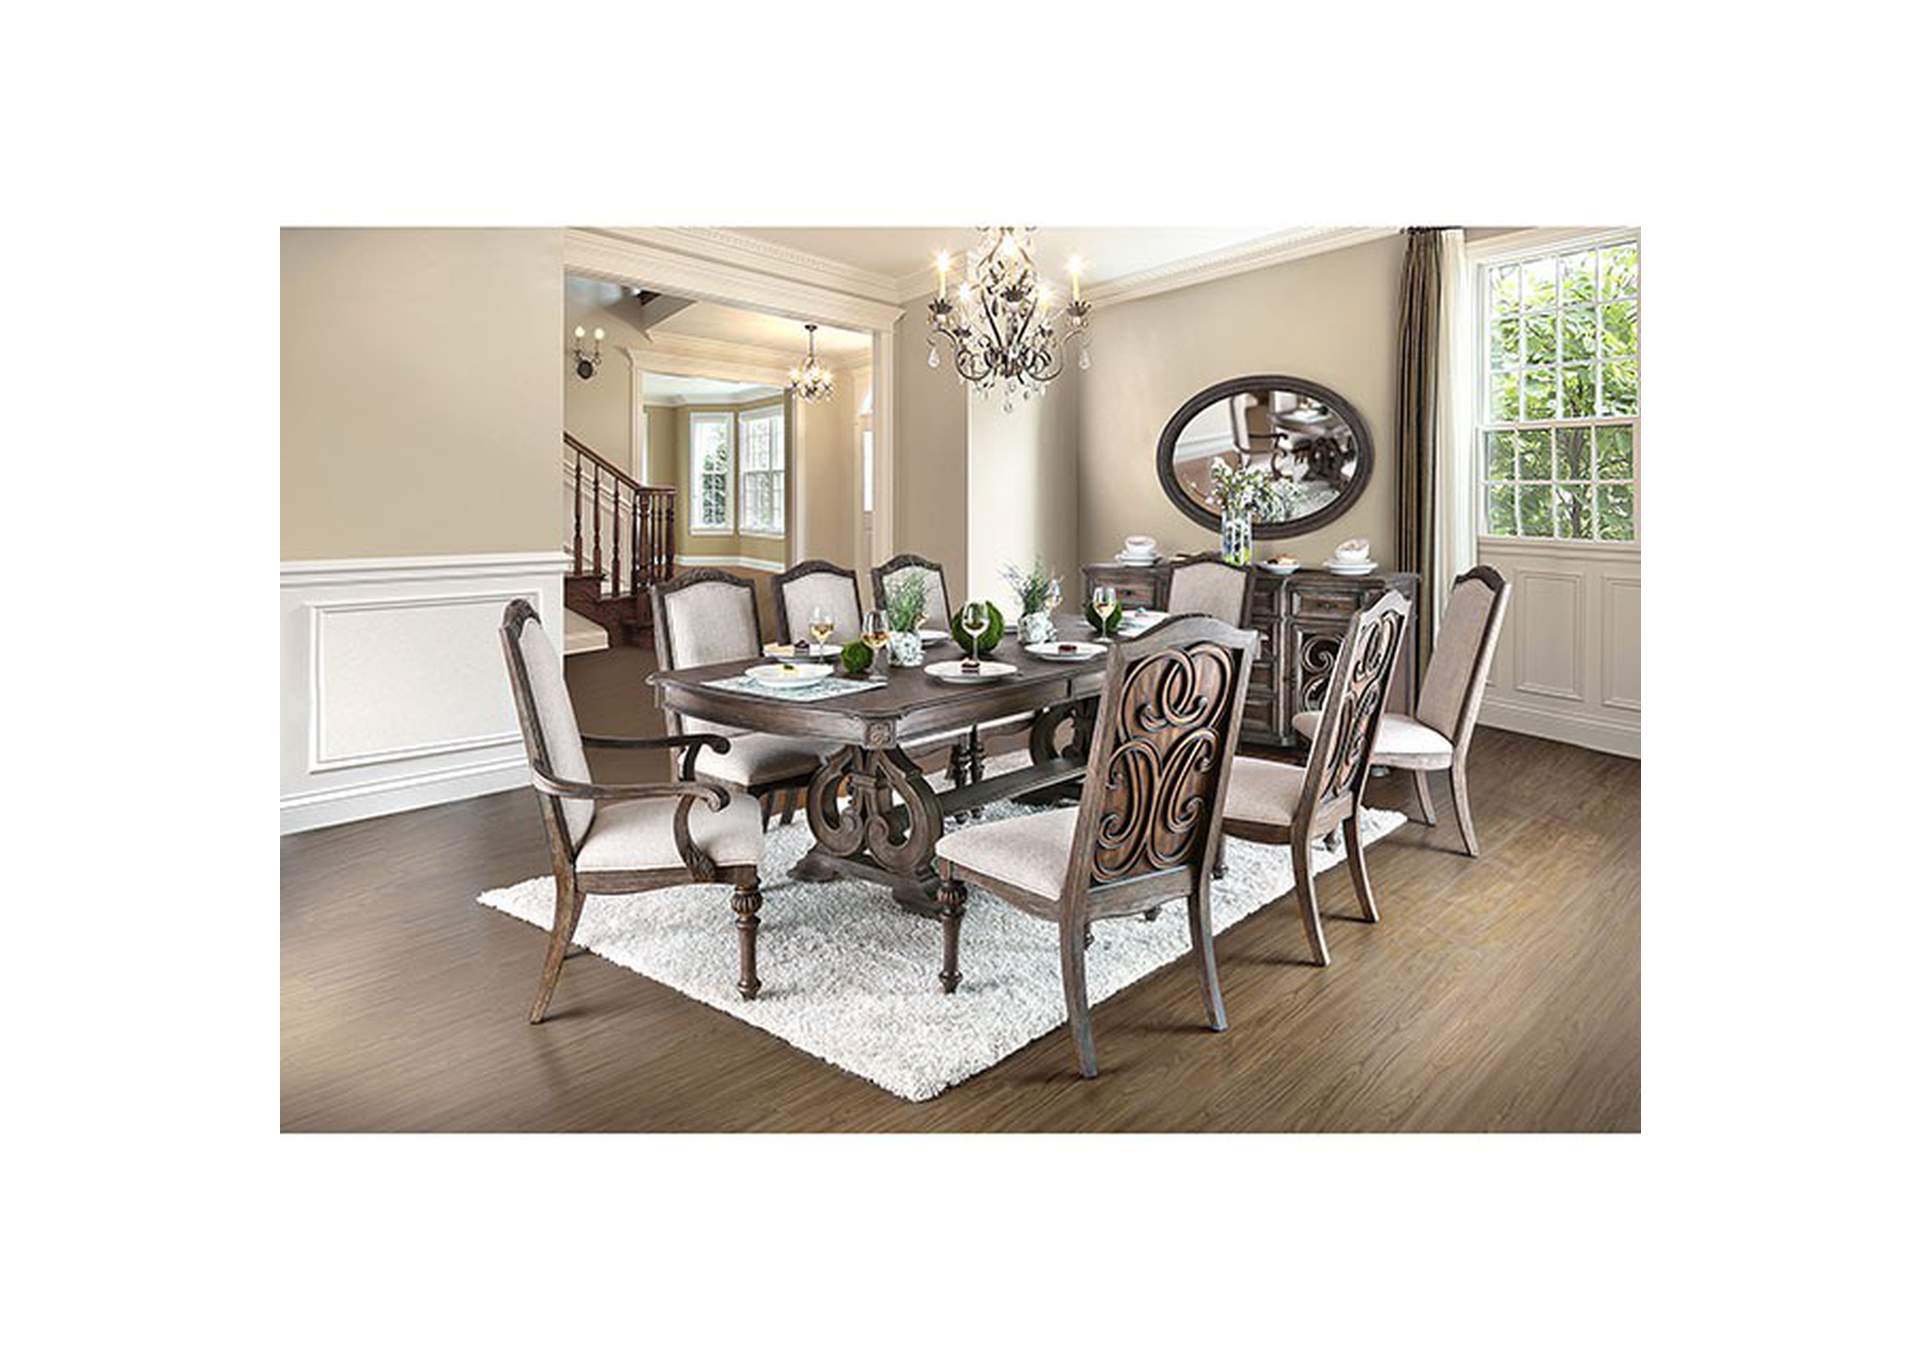 Arcadia Dining Table,Furniture of America